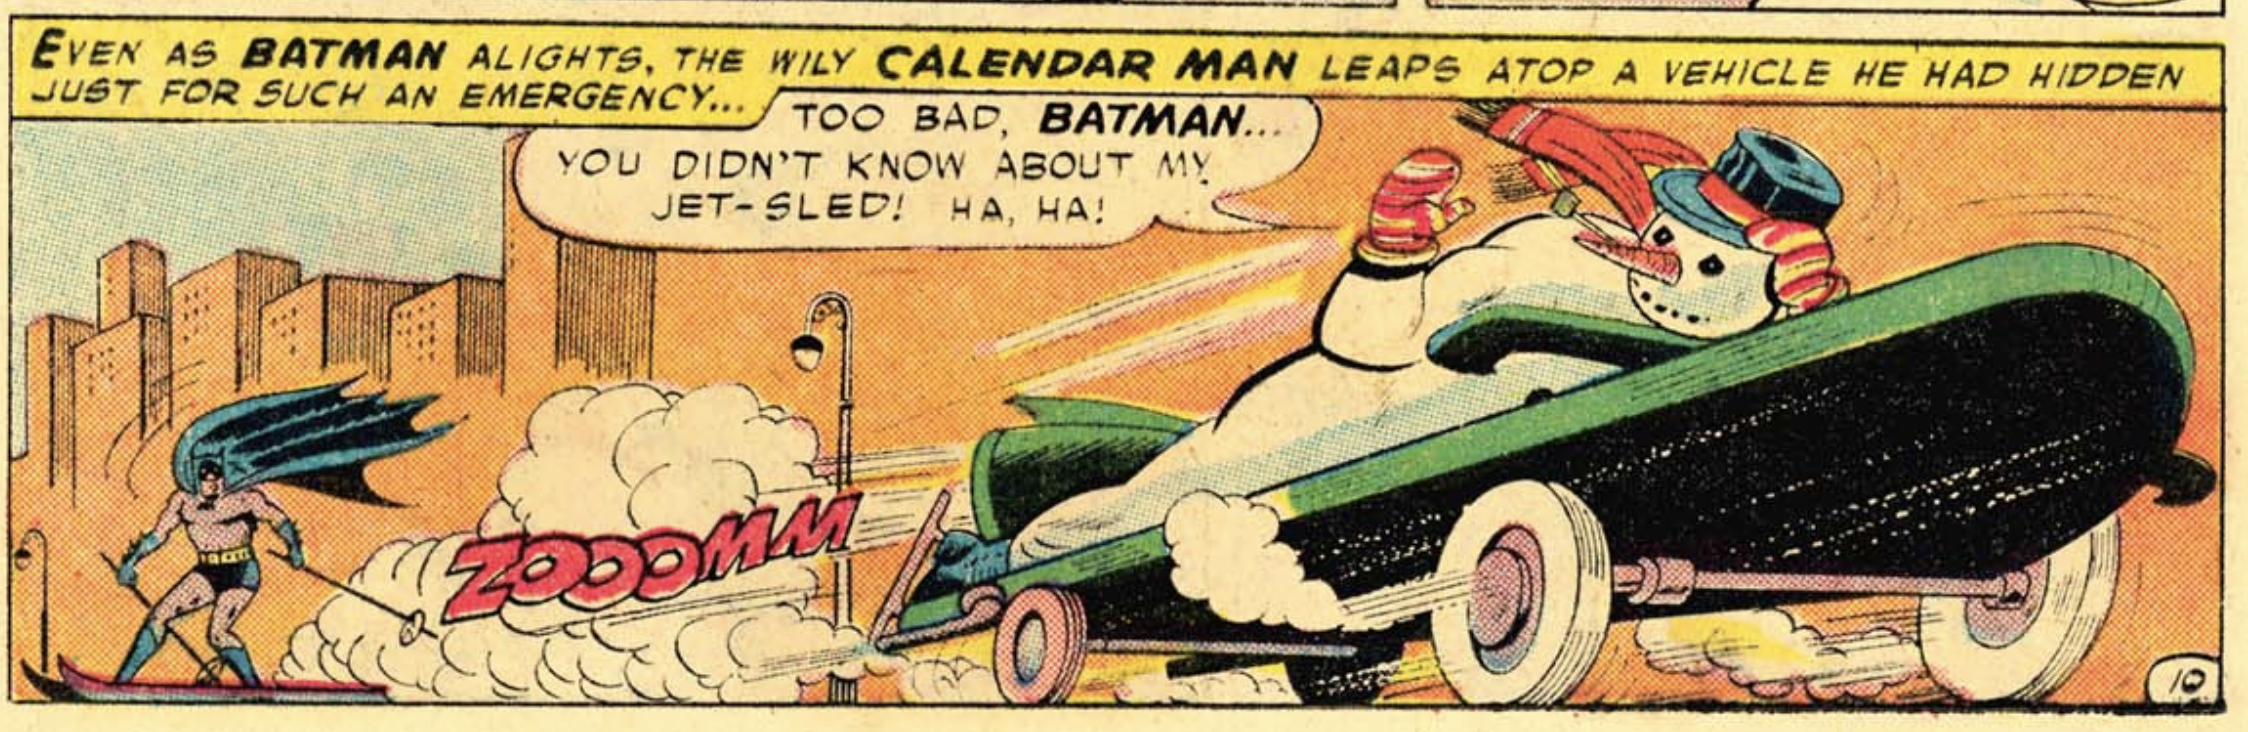 Calendar Man dressed as a snowman riding a rocket sled being chased by Batman who is on skis for some reason.